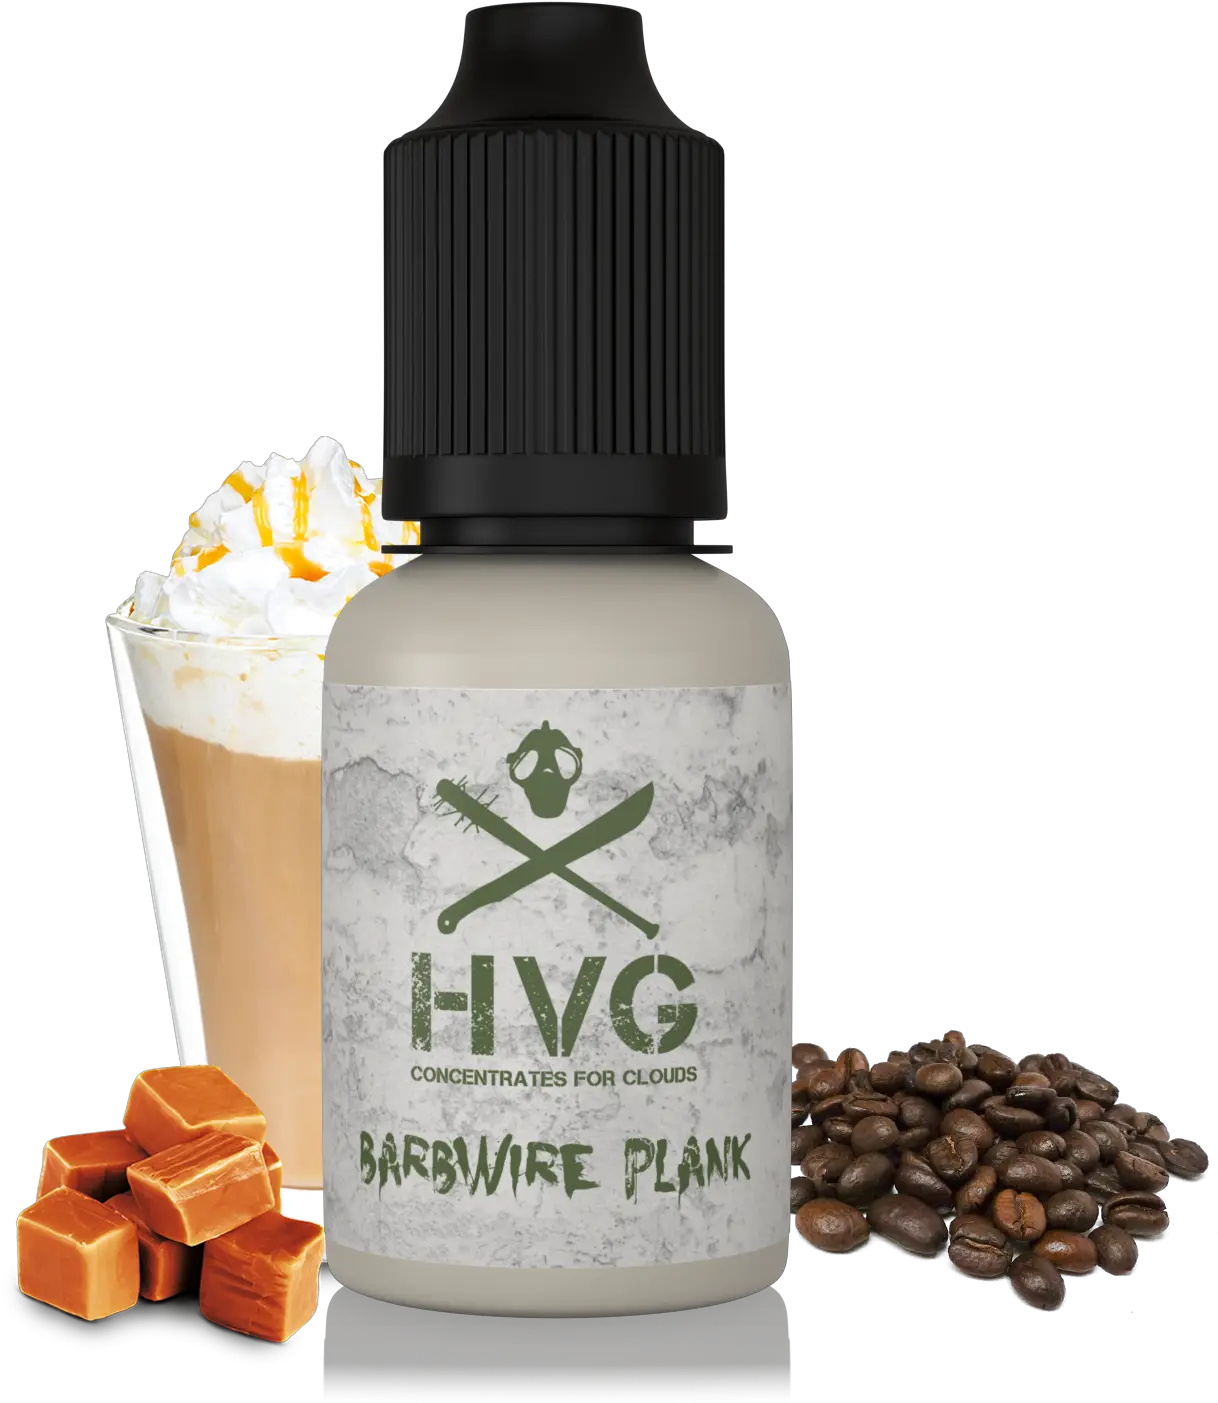 Hvg Barbwire Plank 20ml Fuu Concentrates Transparent Caramel Macchiato Png Barbwire Png